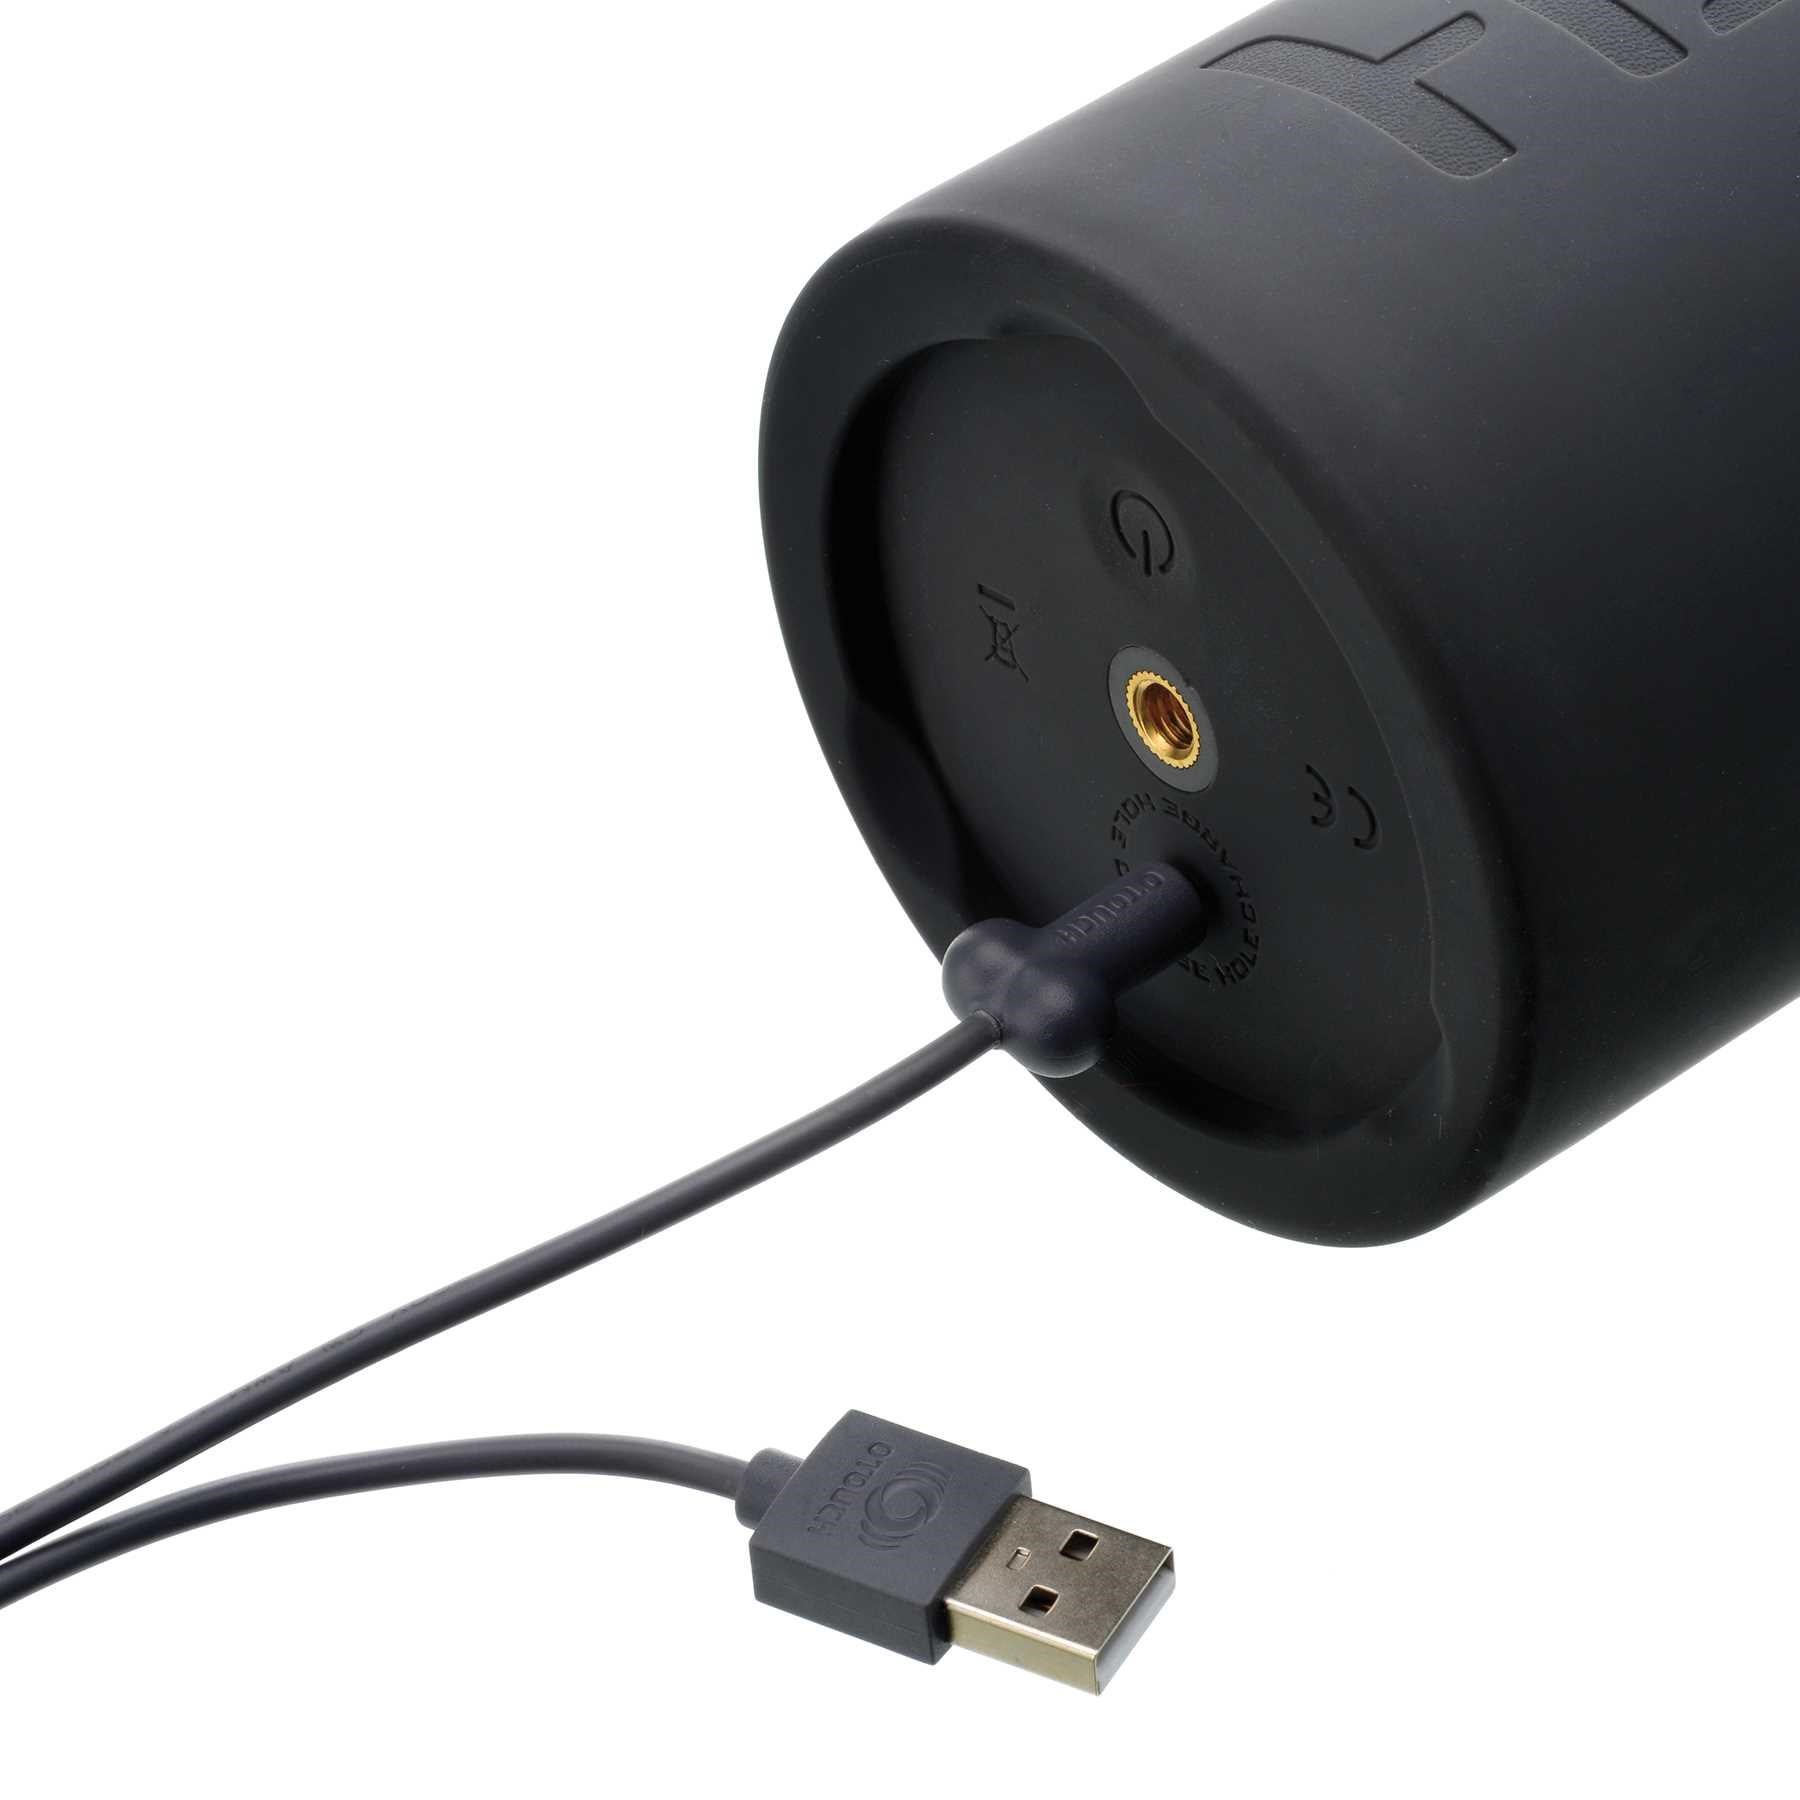 Inscup 2 with USB charging cable image 2